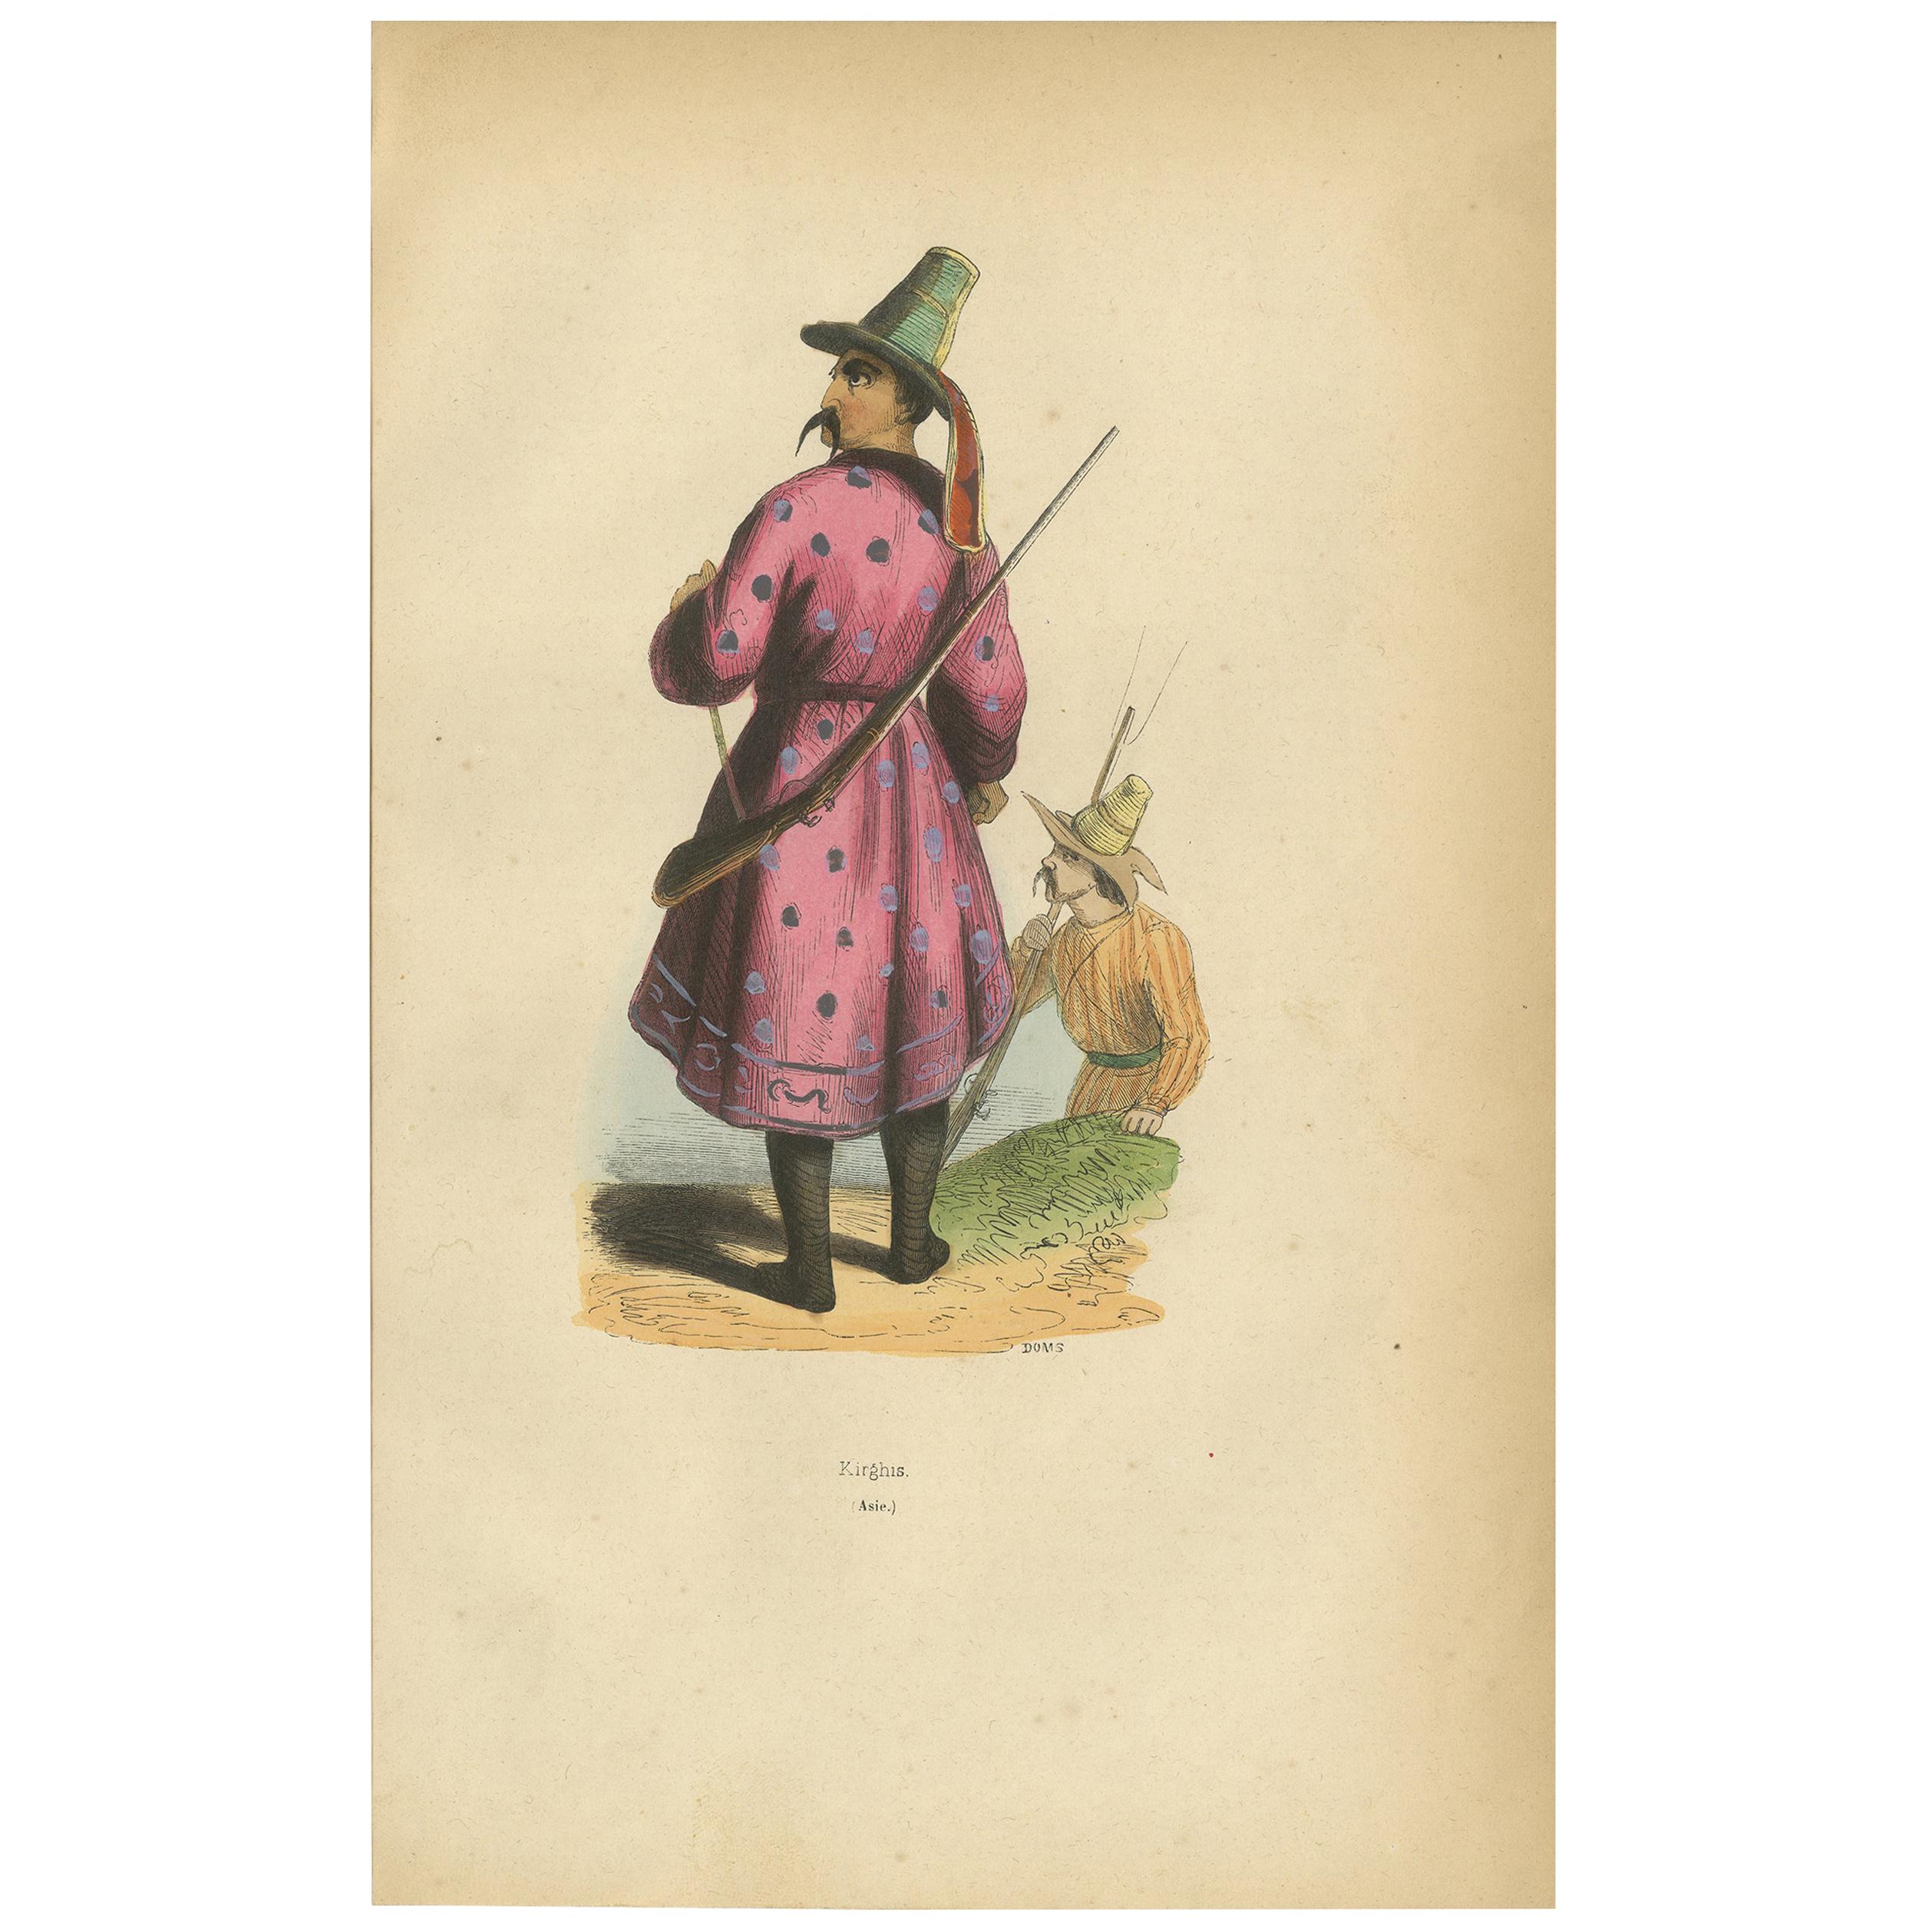 Antique Print of a Kyrgyz by Wahlen, '1843'